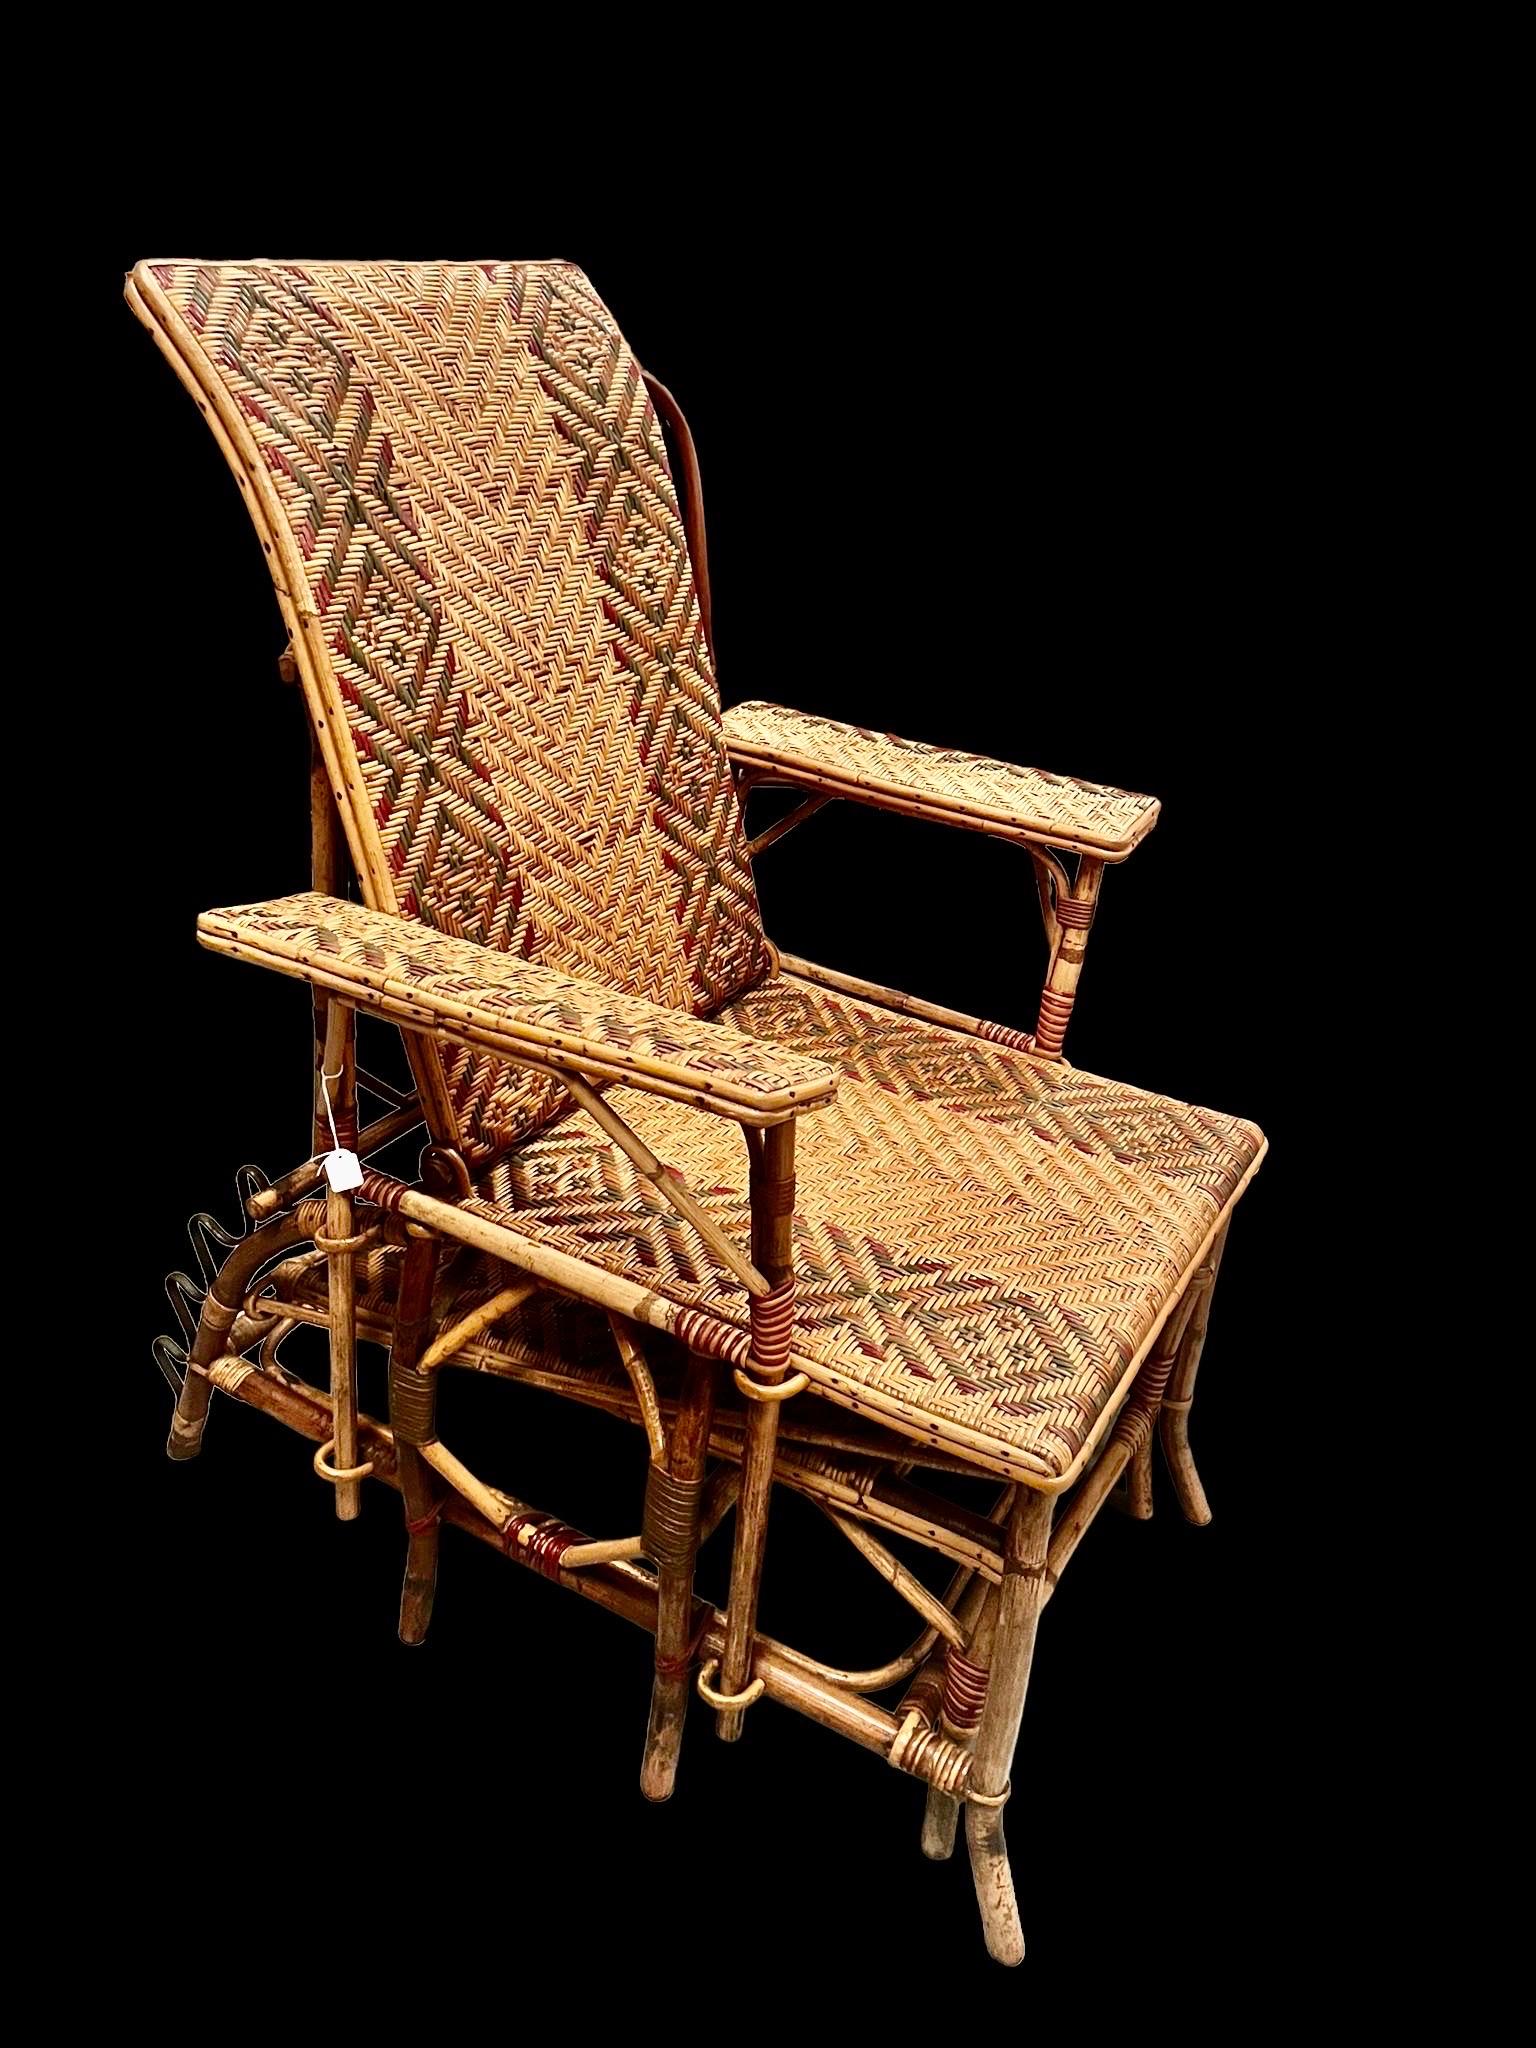 Early 20th Century Wicker Lounge Chair with Ottoman, 1920s, Spain